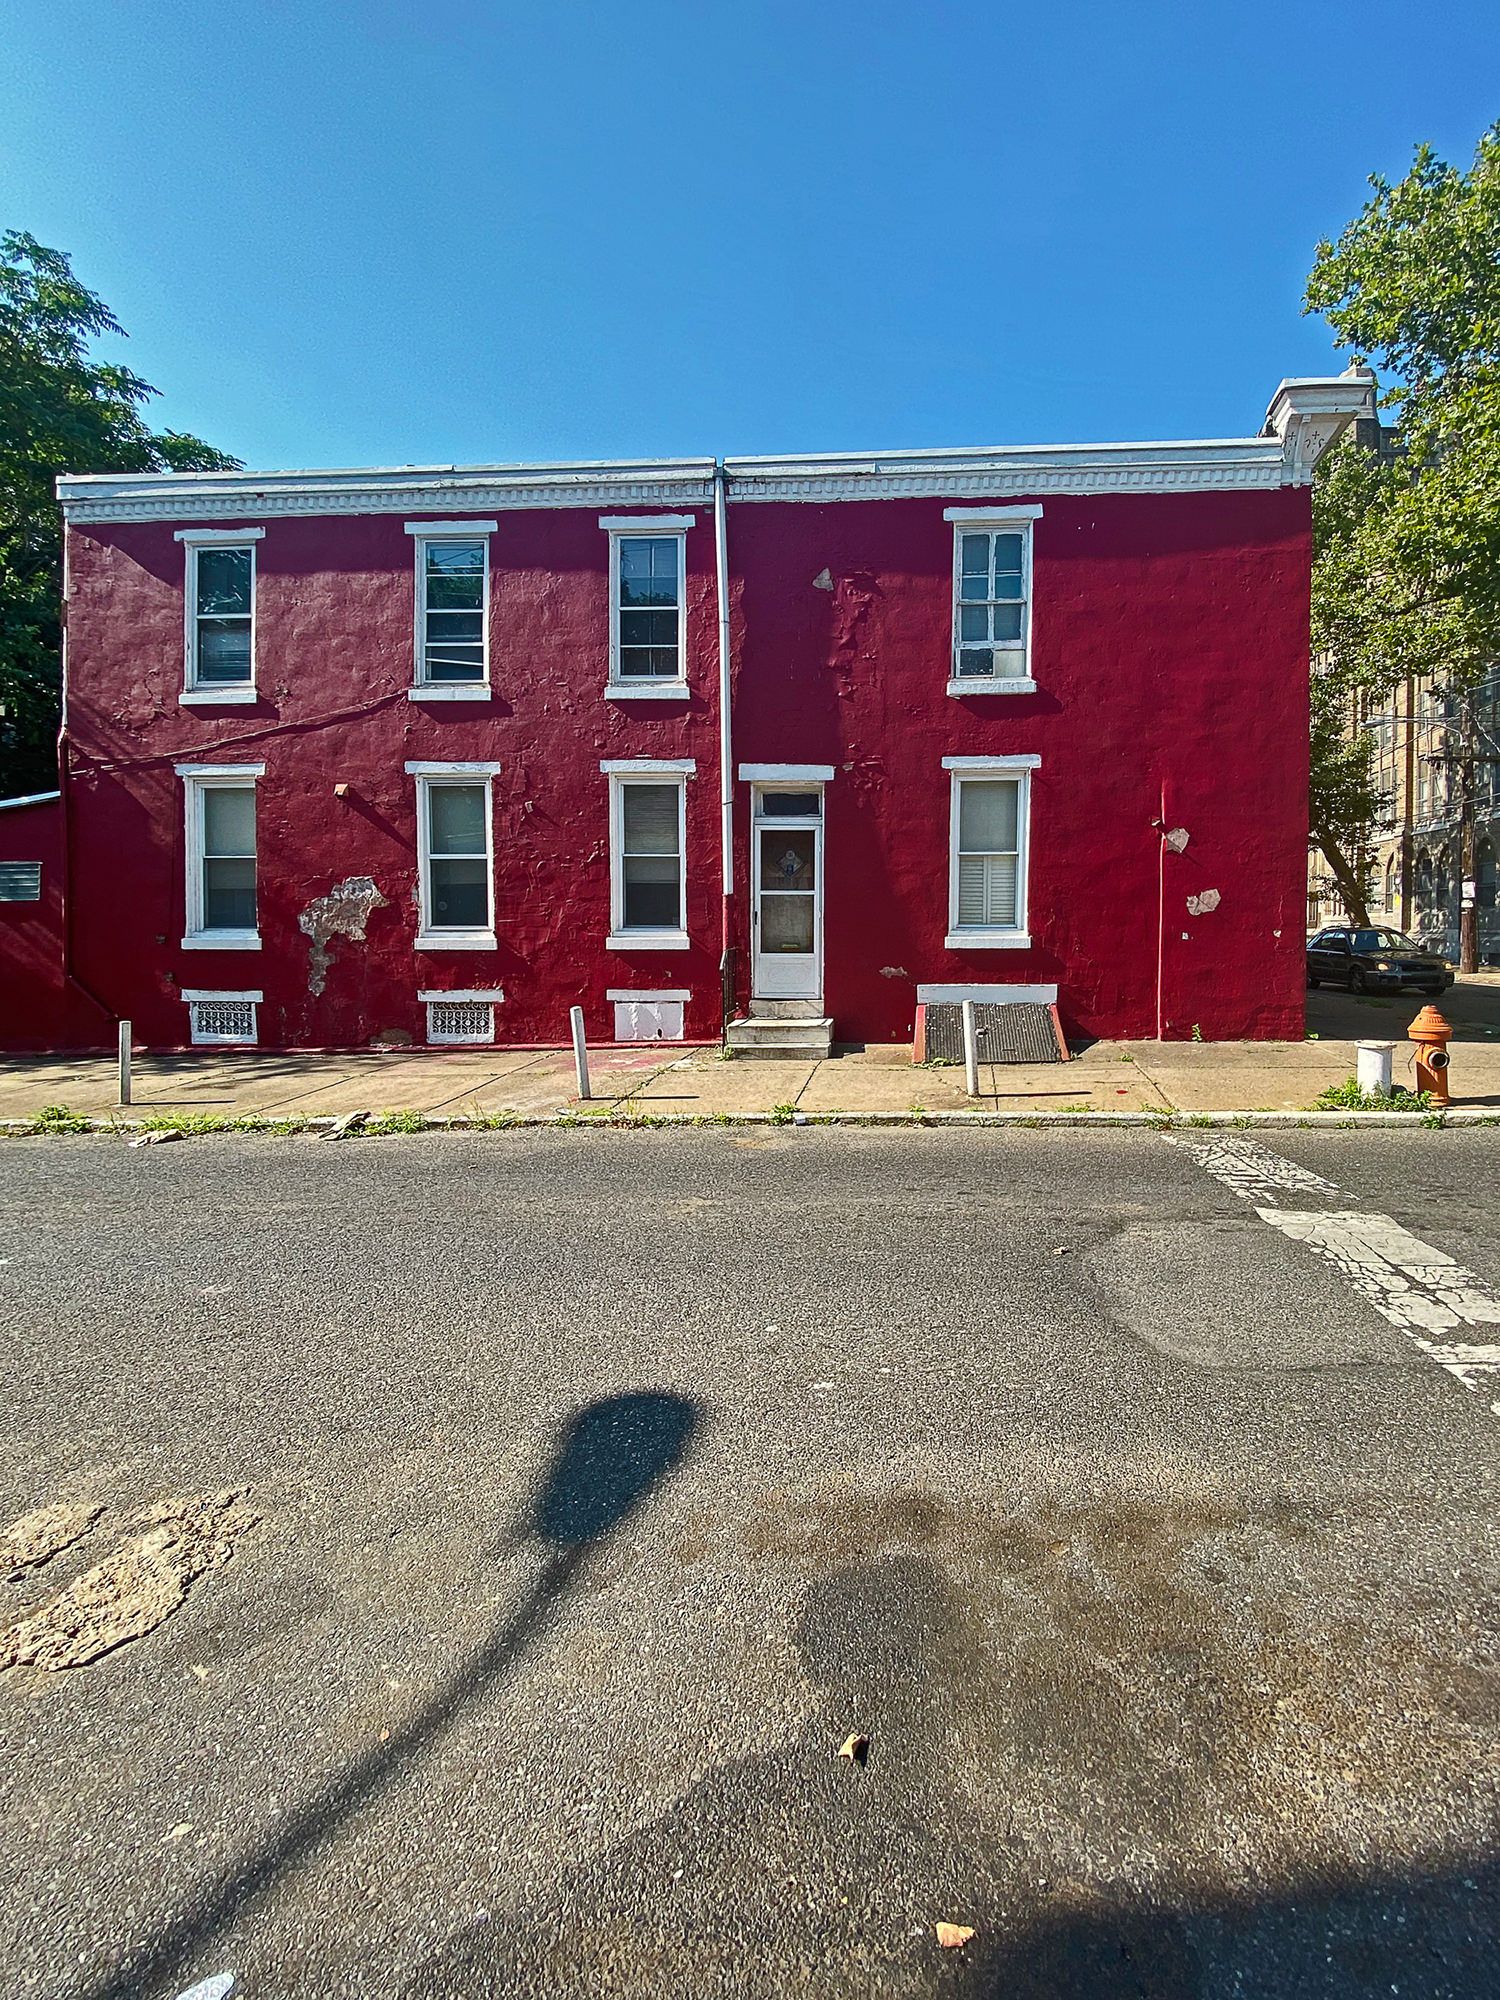 Image description: a photograph showing the exterior of the artist’s home where she grew up, a red two-story apartment building, with cement in the foreground and a blue sky and trees on both sides of the building. Art by Deborah Willis.